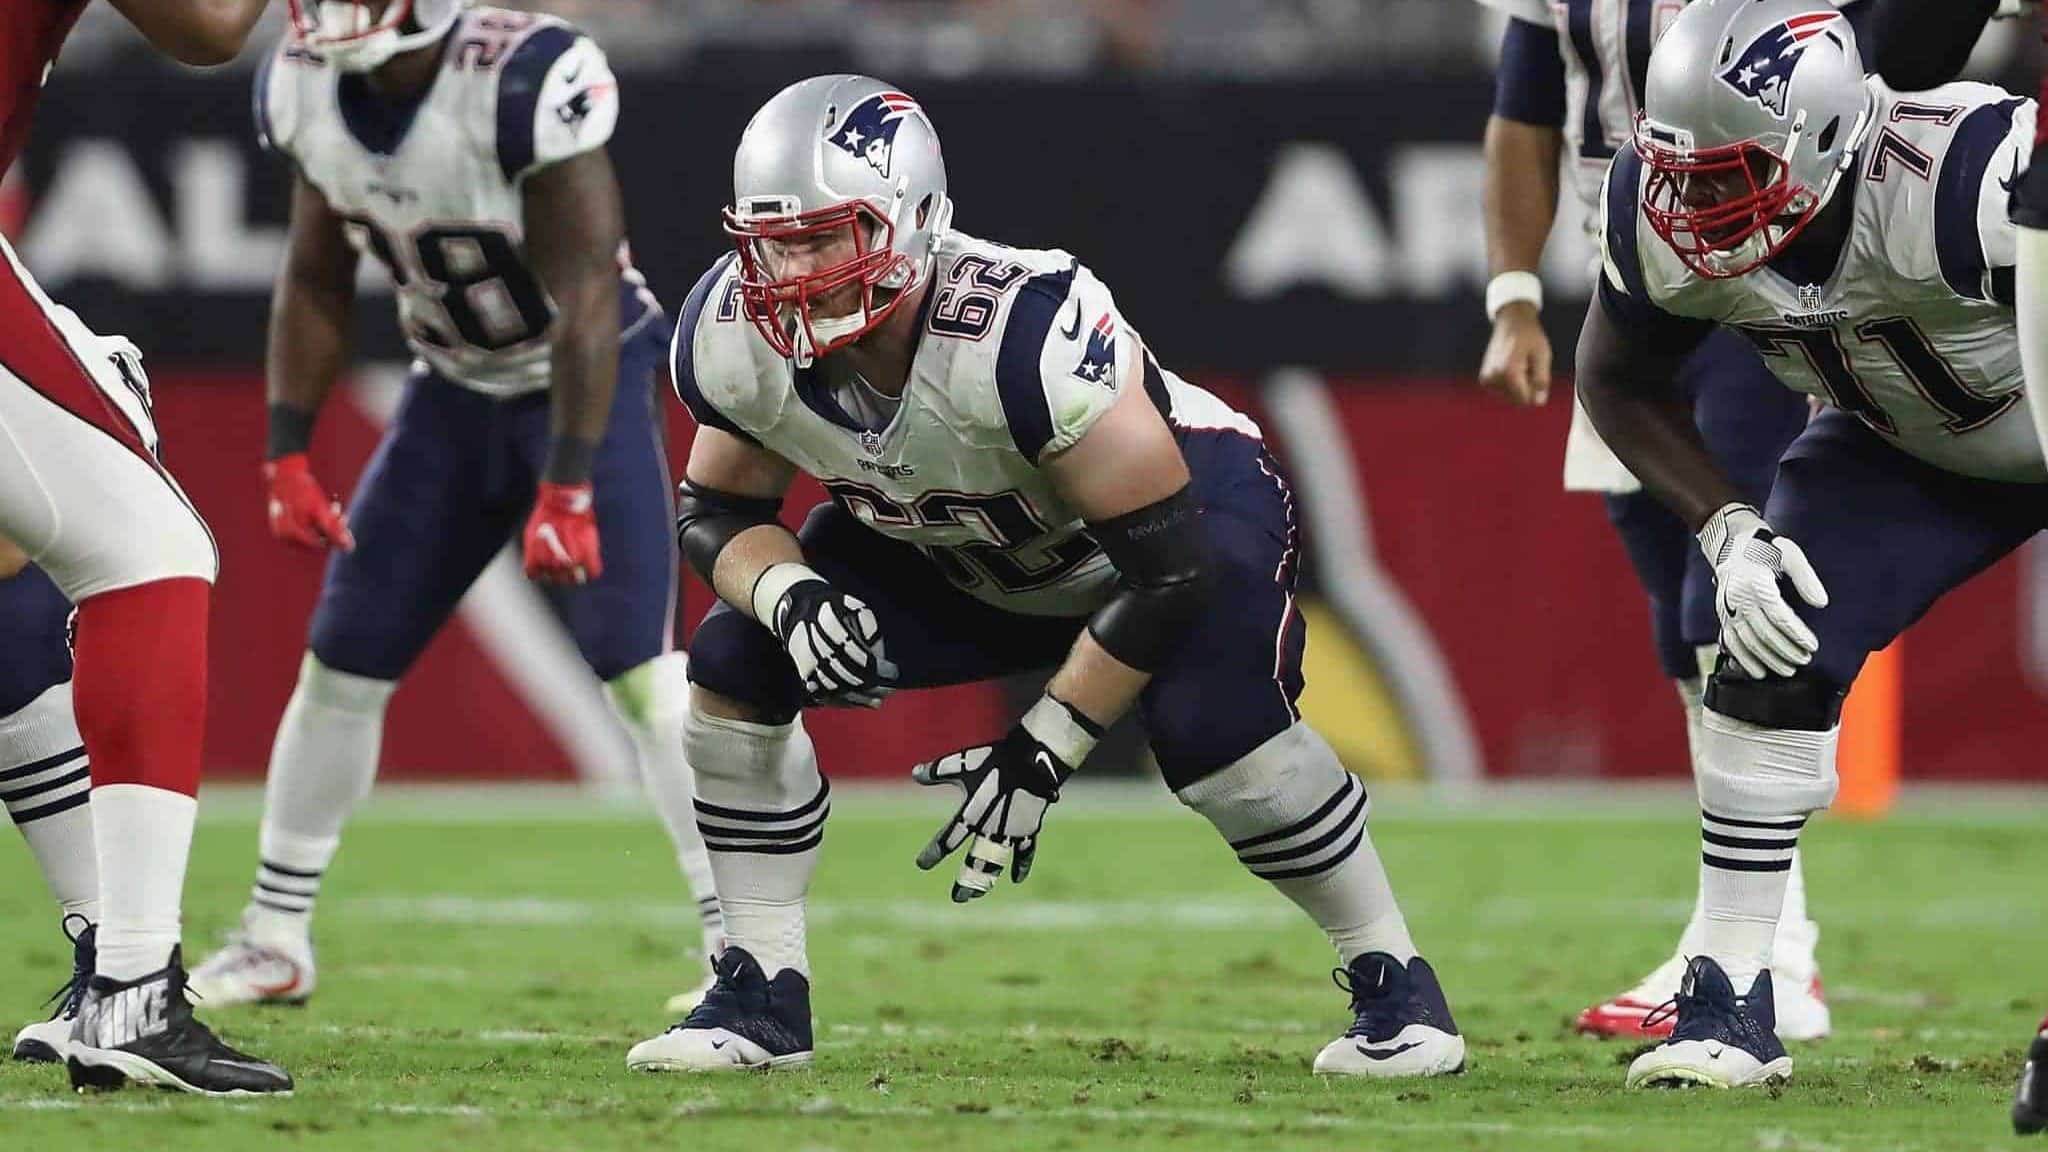 GLENDALE, AZ - SEPTEMBER 11: Guard Joe Thuney #62 of the New England Patriots during the NFL game against the Arizona Cardinals at the University of Phoenix Stadium on September 11, 2016 in Glendale, Arizona.